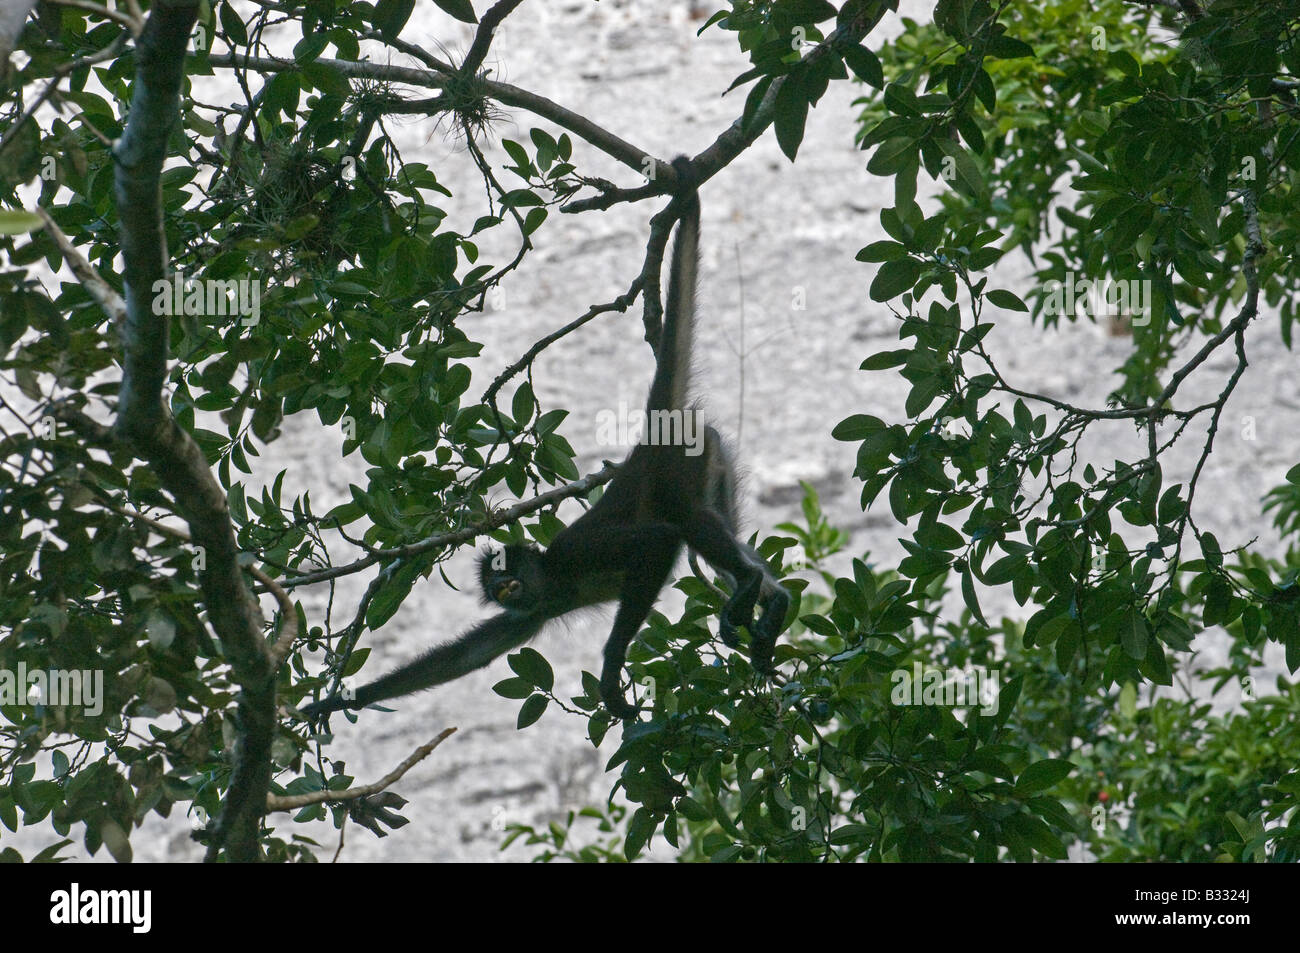 Central American Spider Monkey Ateles geoffroyi silhouetted against a Mayan Temple at Tikal Guatemala Stock Photo